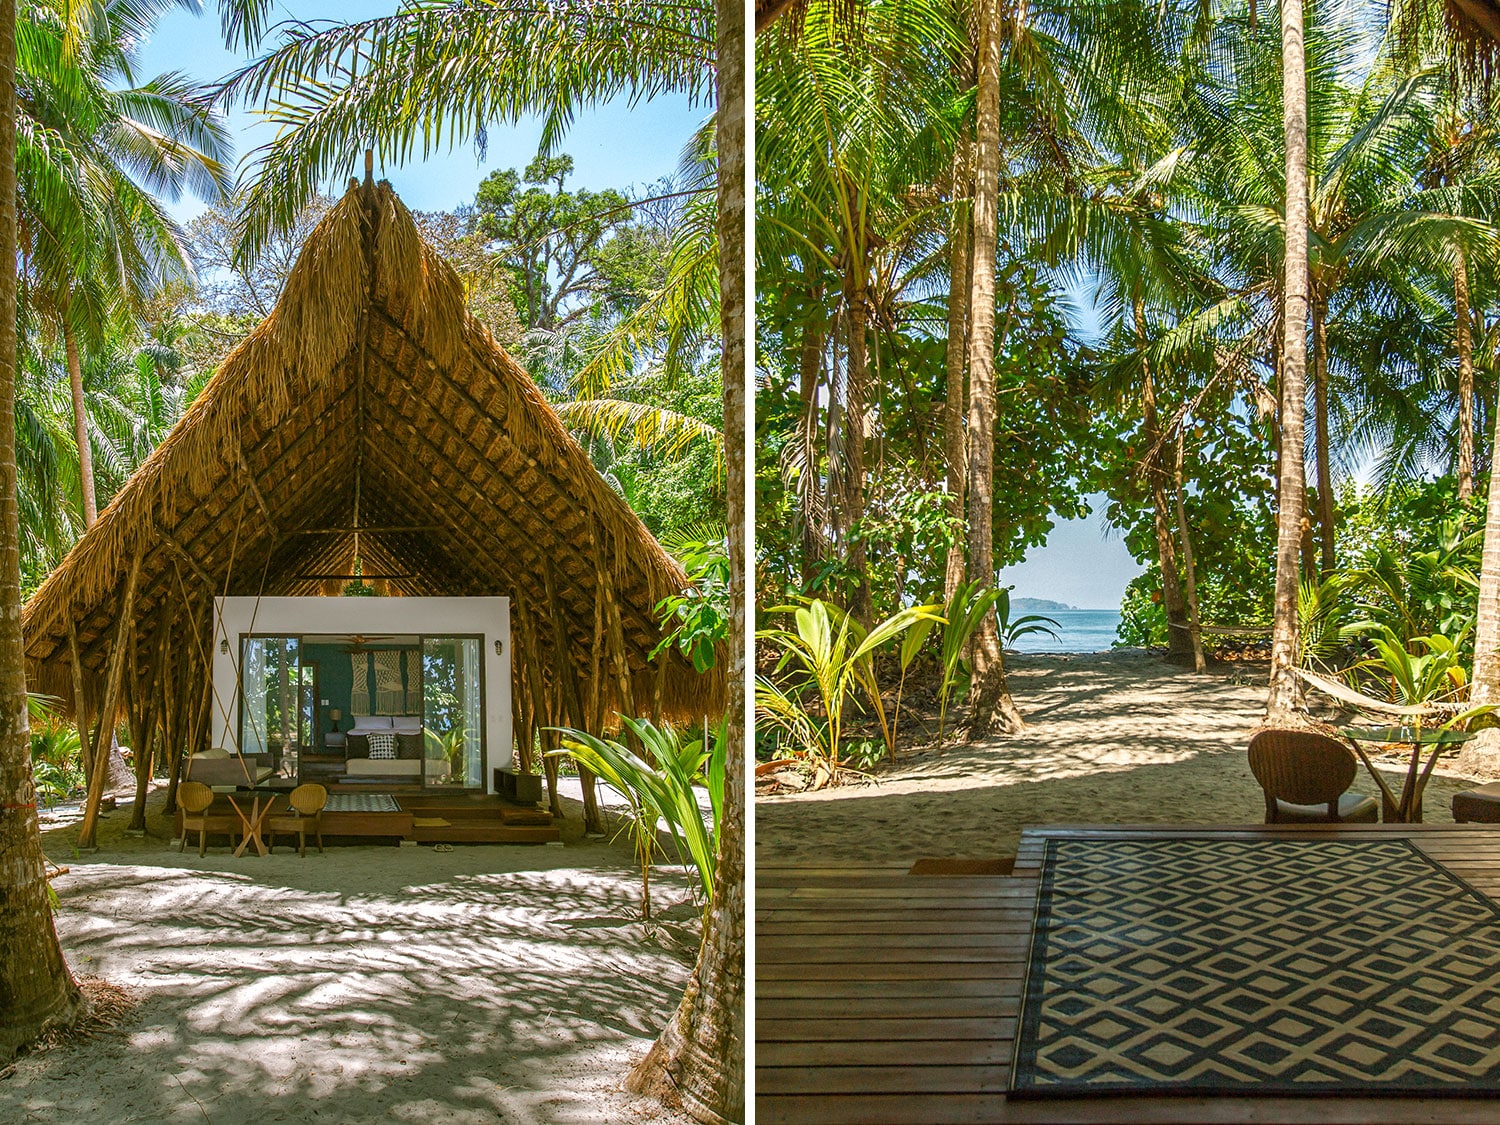 Isla Palenque offers guests a private casita with decor and design inspired by the surrounding natural beauty.